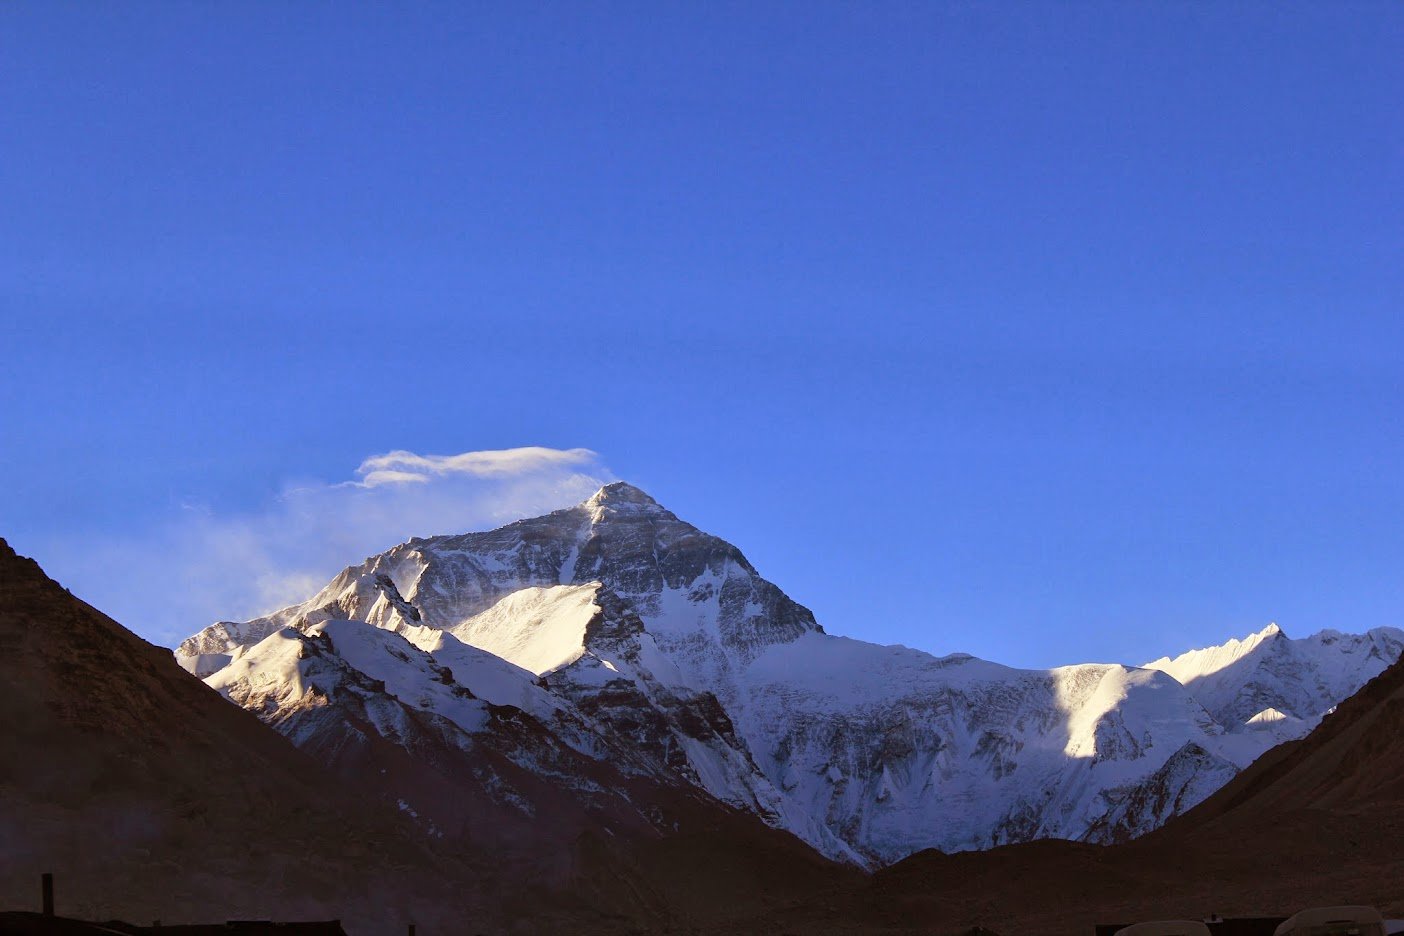 Mt. Everest image with clouds and blue sky from Everest Base Camp in Tibet.